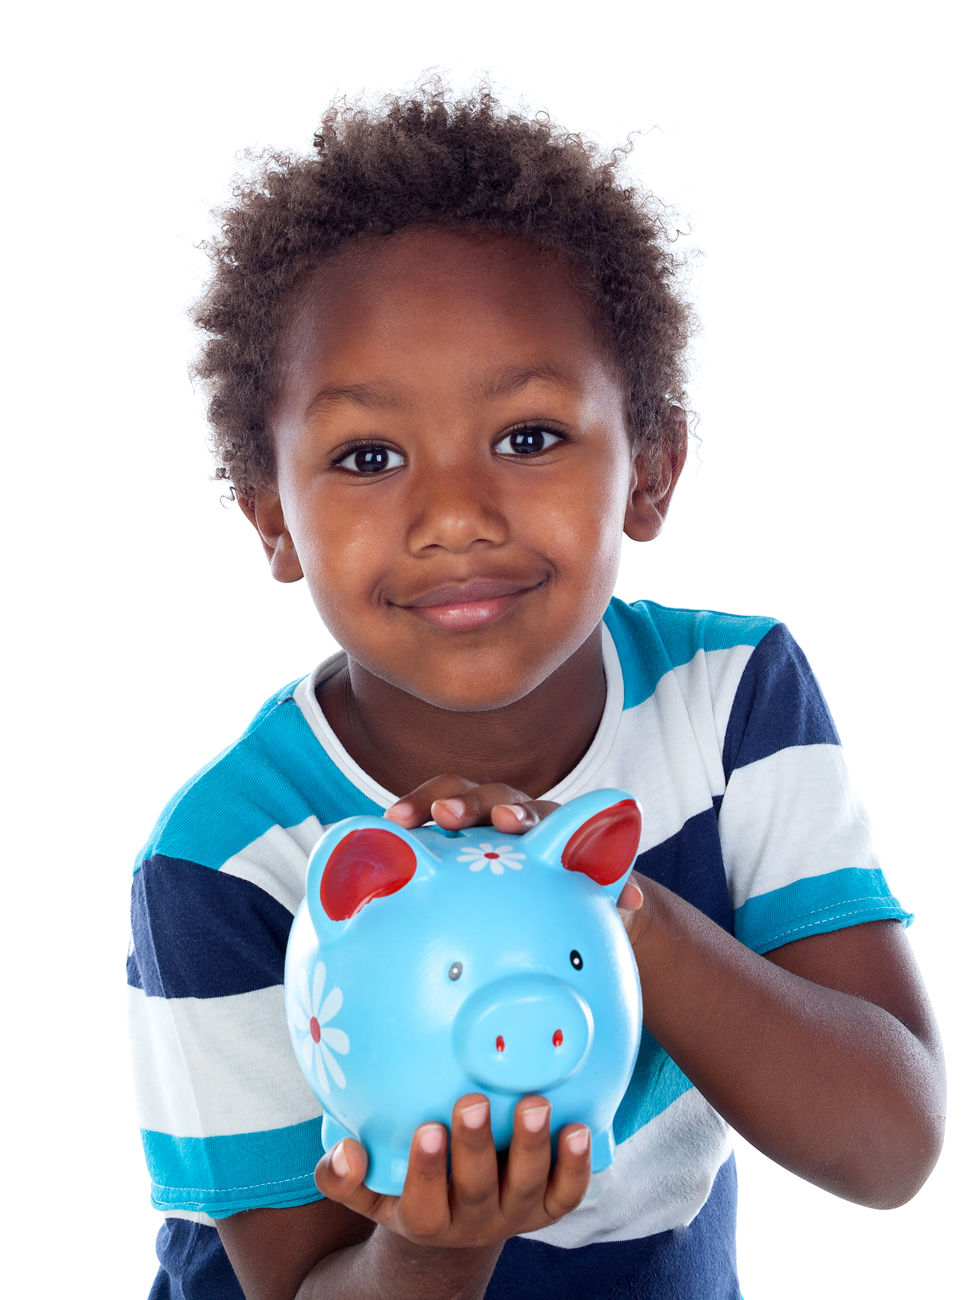 Child with blue moneybox